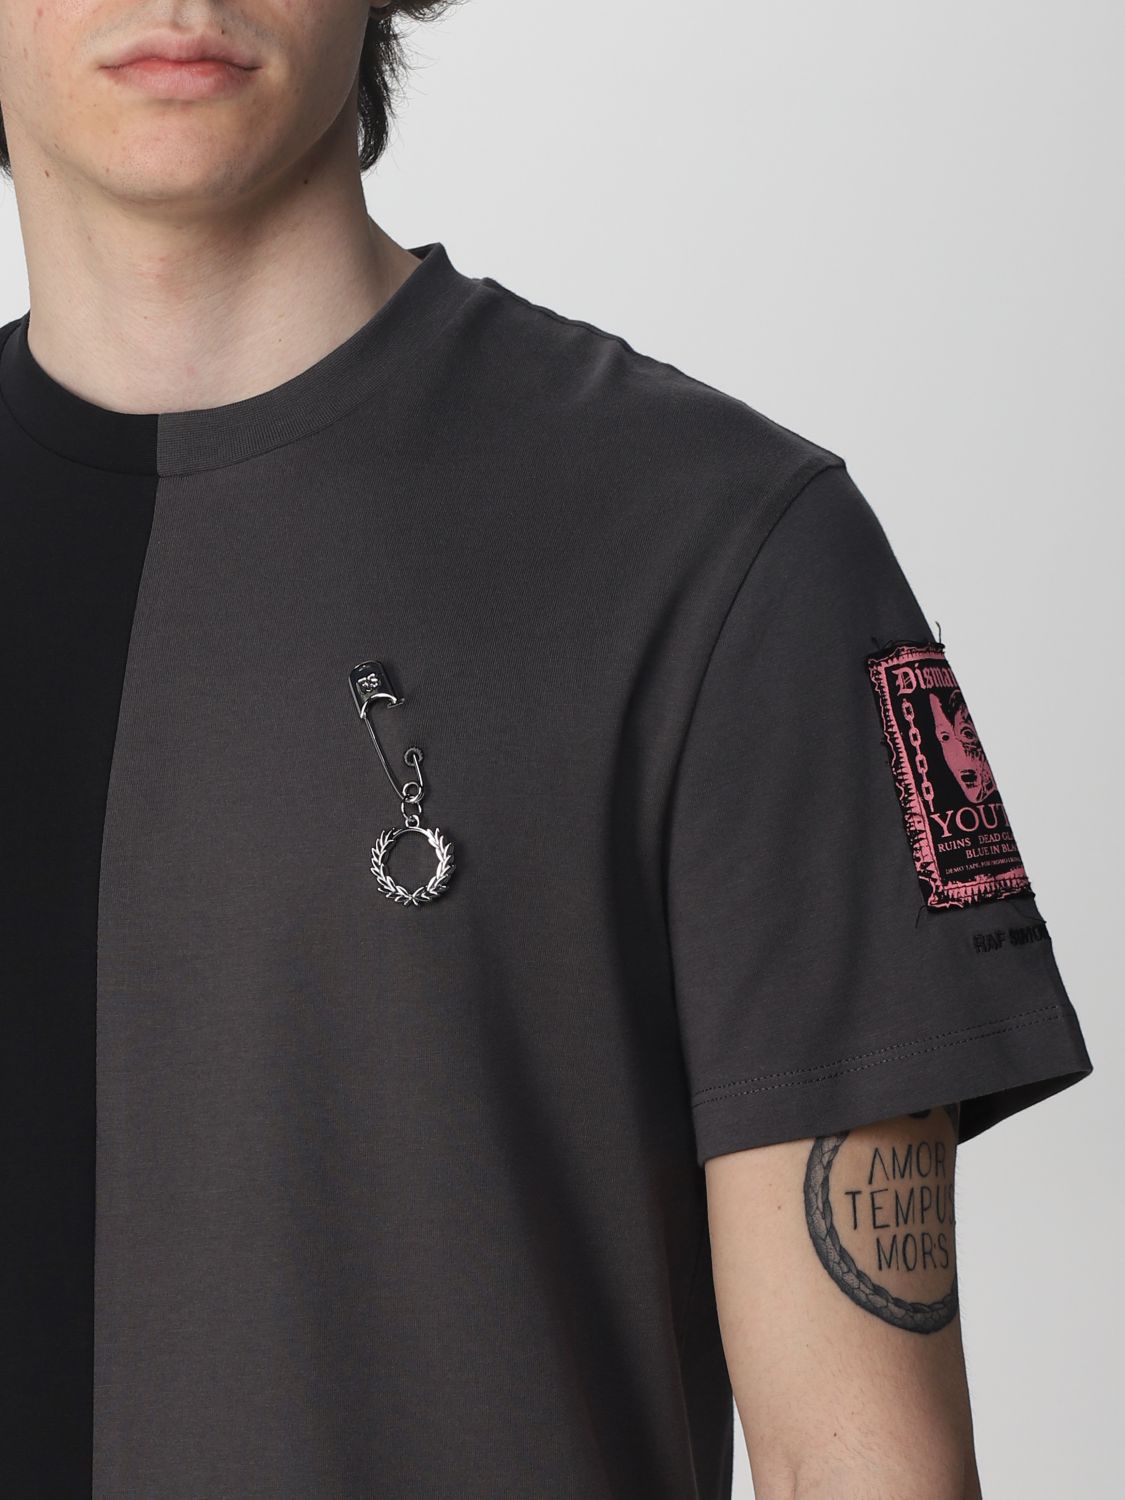 Tシャツ Fred Perry By Raf Simons: Tシャツ Fred Perry By Raf Simons メンズ グレー 3